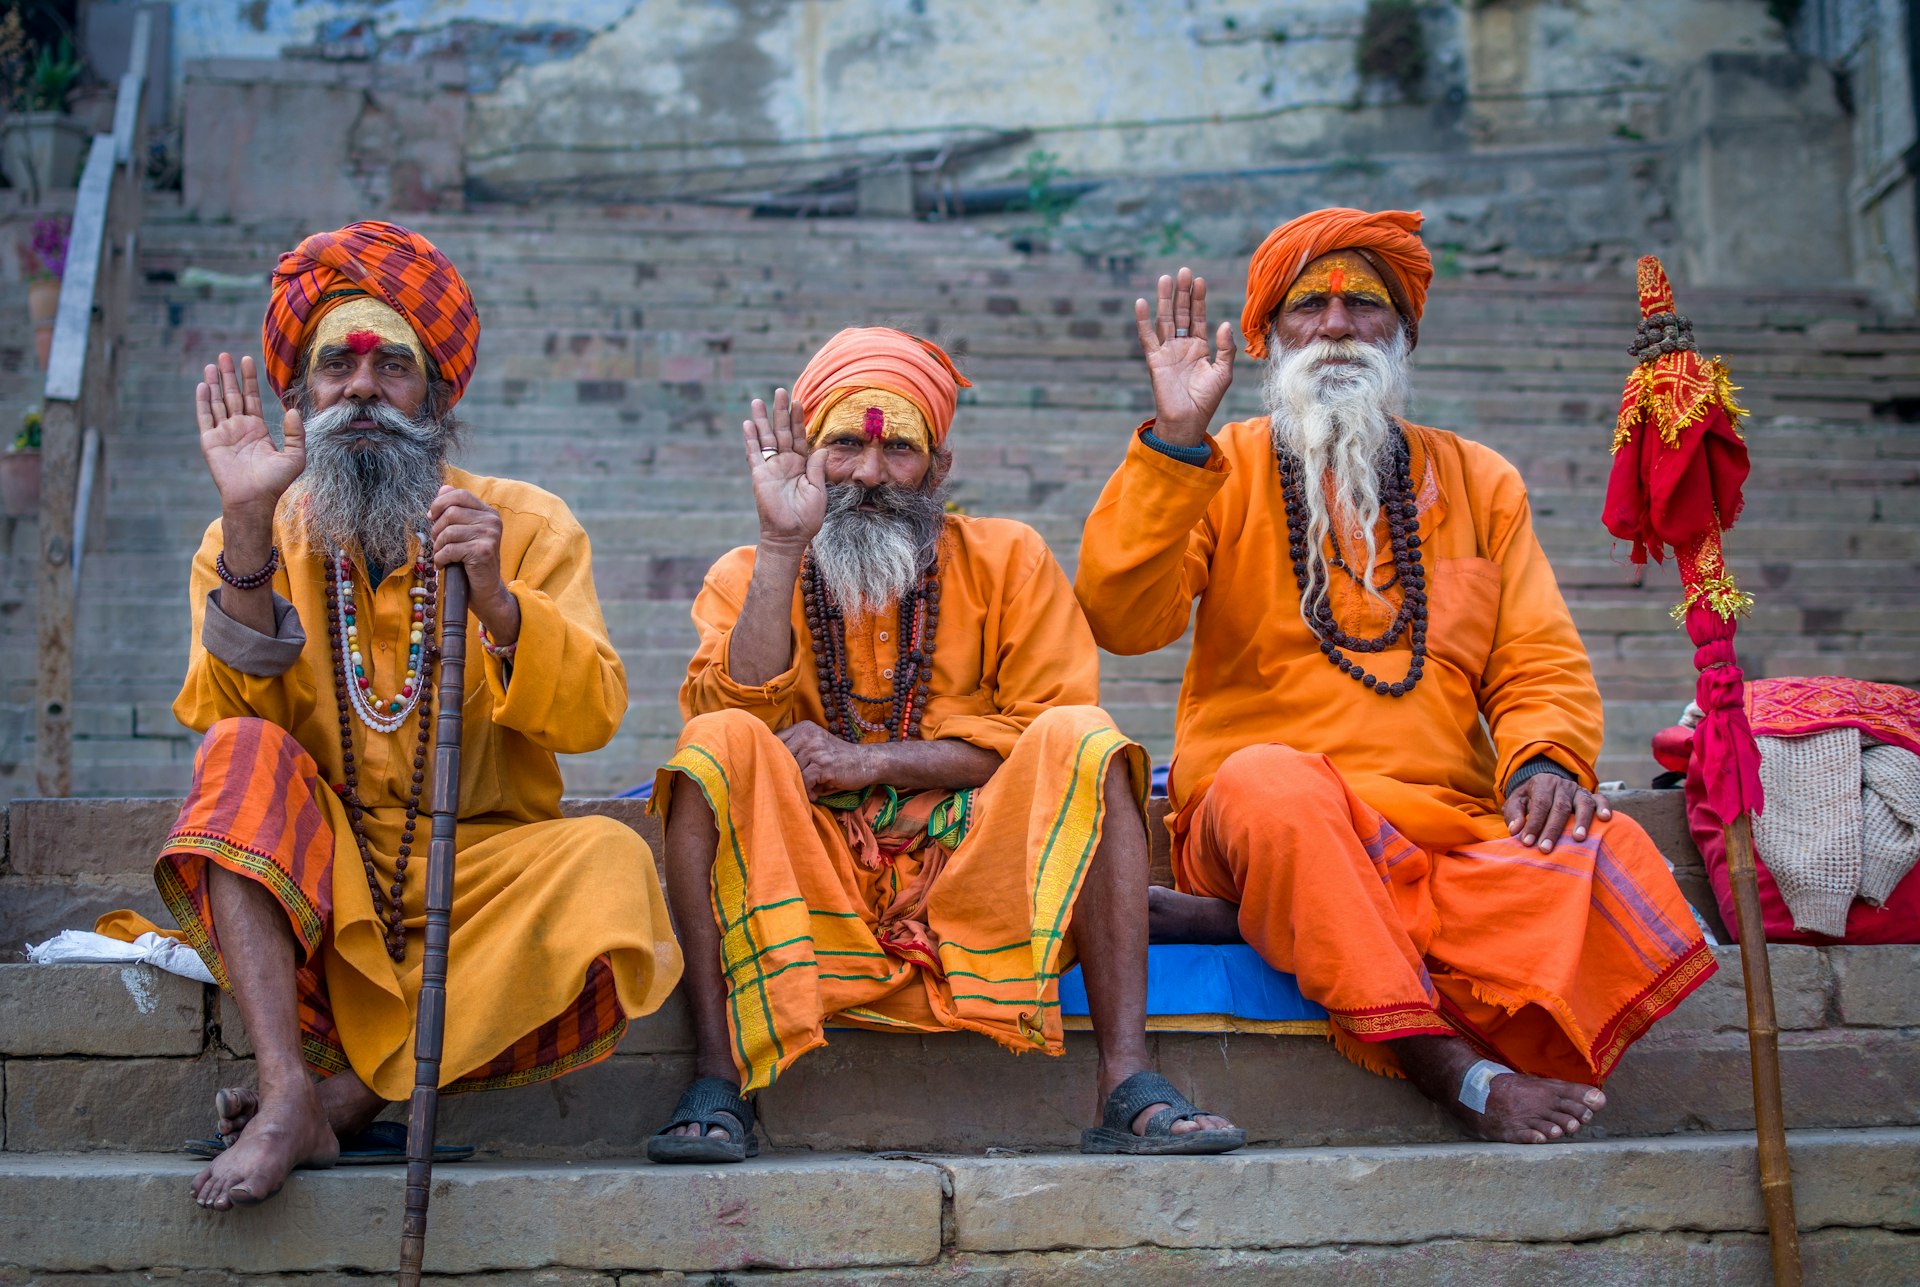 Three holy men dressed in orange robes and turbans, each holding up their right hands, sit on a set on concrete steps in Varanasi, India.